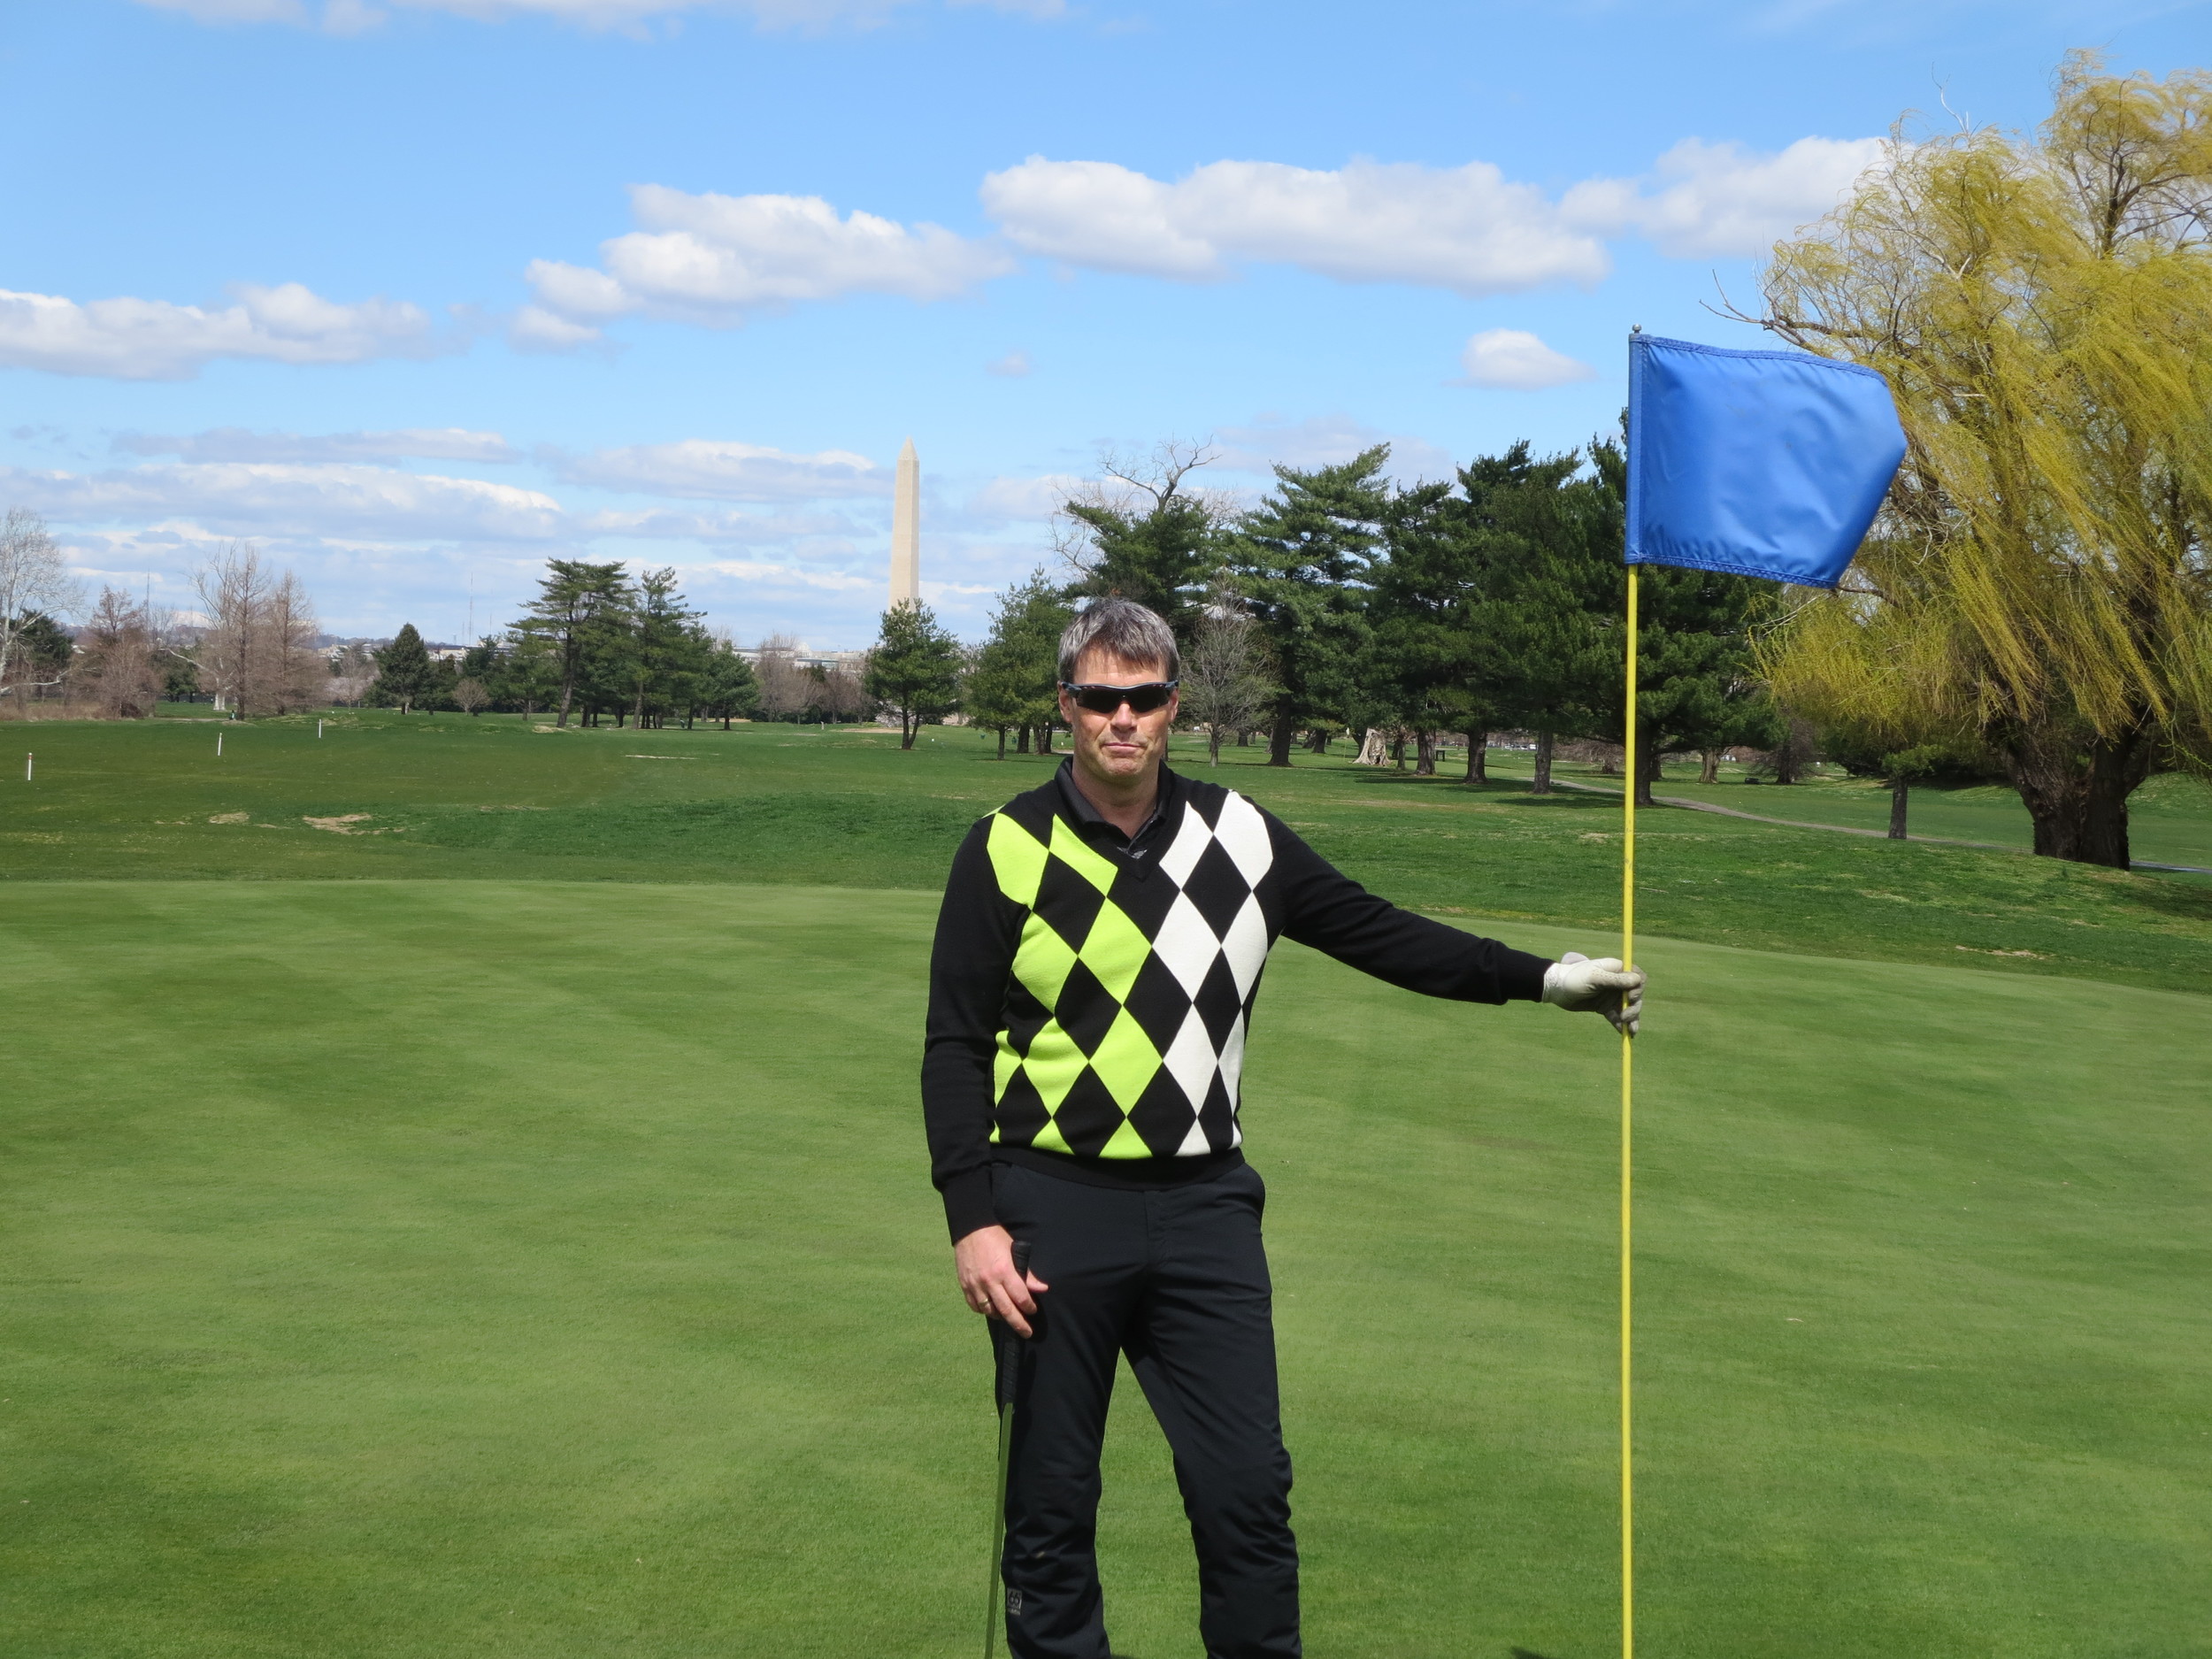 Golf with the Washington Monument in the background